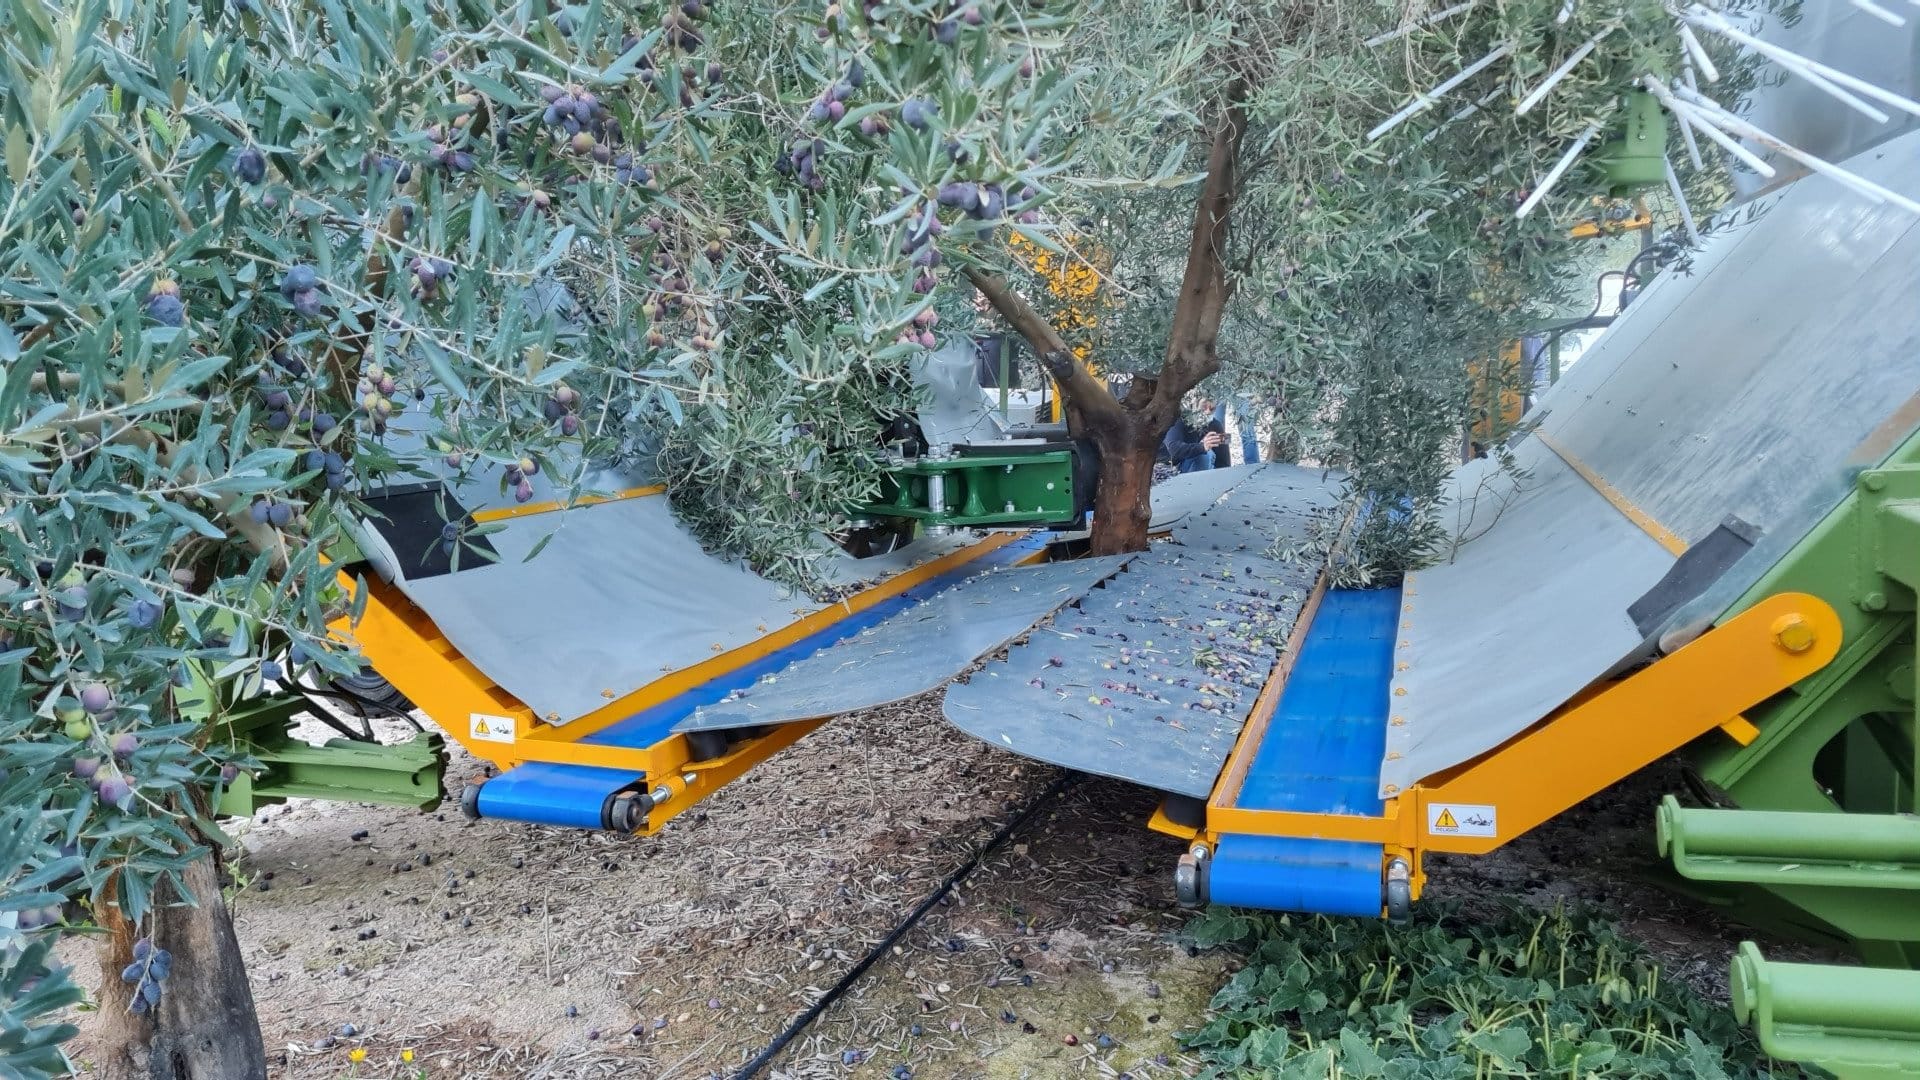 europe-production-business-researchers-unveil-the-latest-technologies-to-help-harvest-and-produce-olive-oil-olive-oil-times